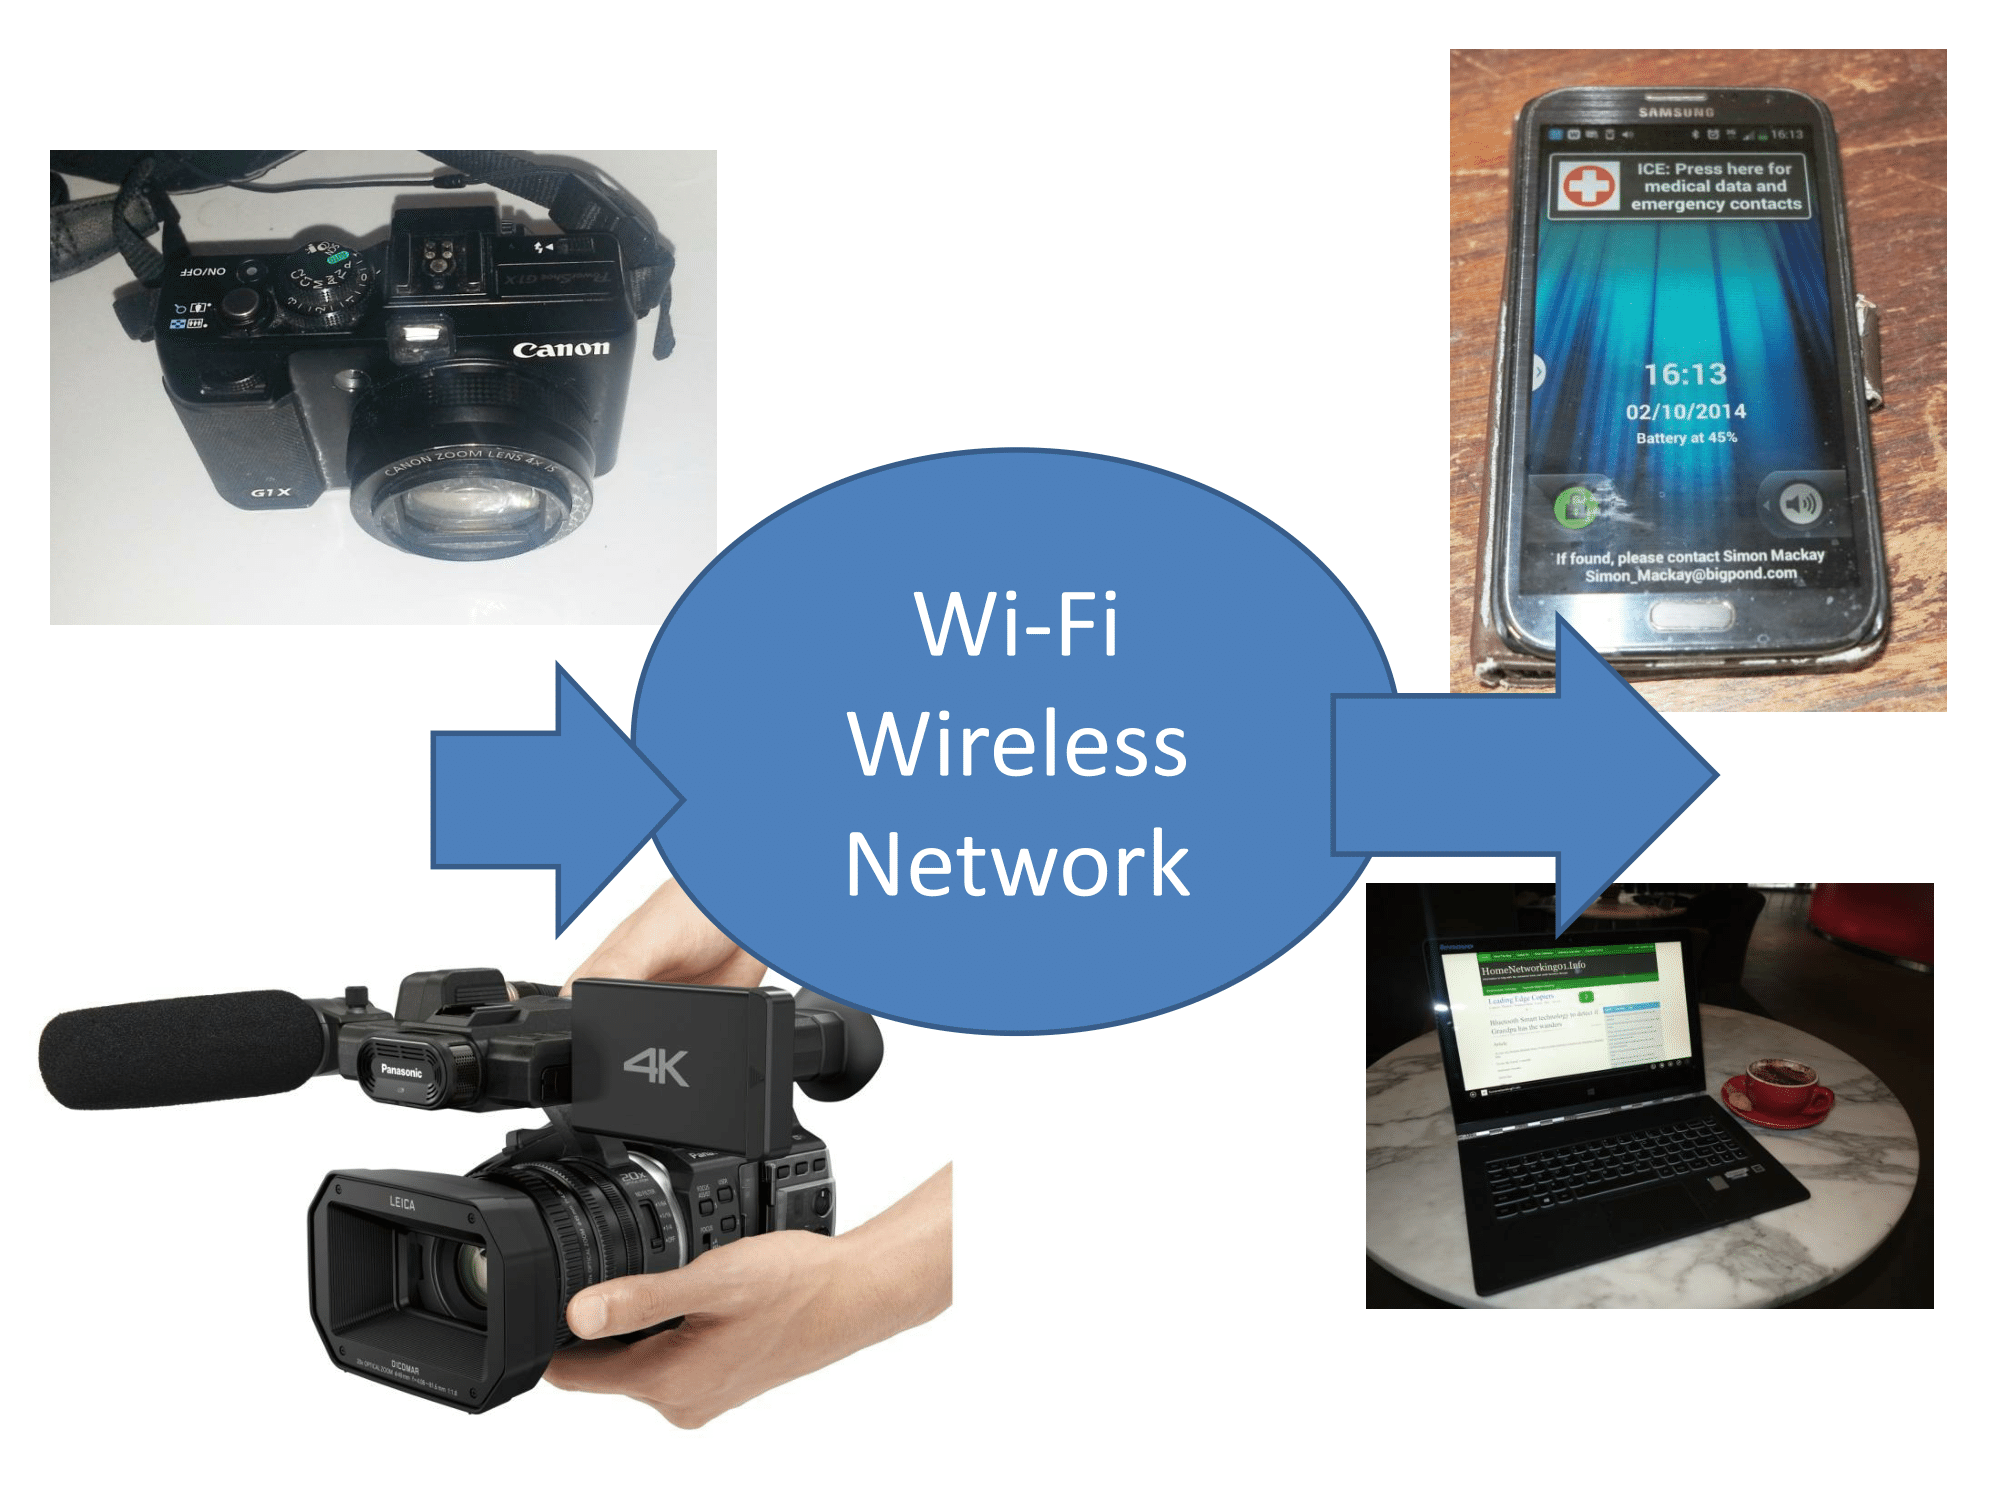 Wi-Fi now the expected feature for digital cameras and camcorders